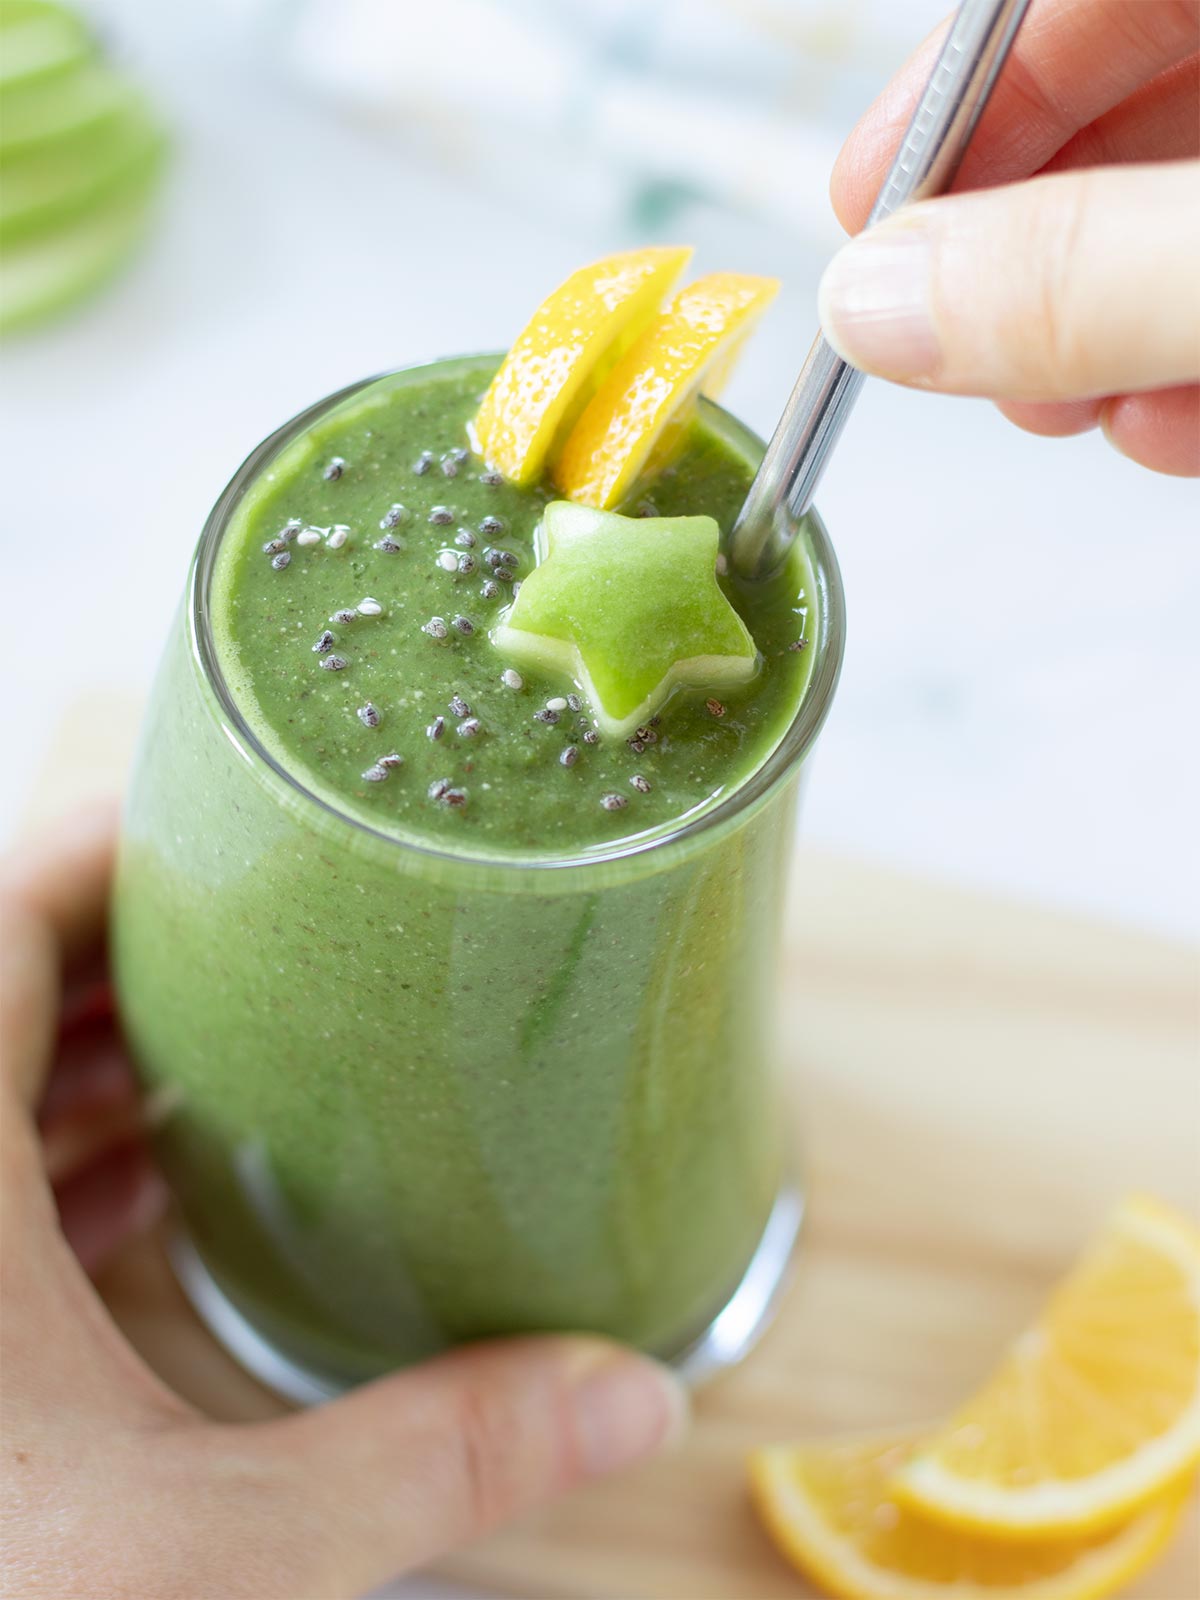 Female hand is holding a creamy homemade gut cleansing drink in a glass garnished with sliced lemon, chia seeds, and carved apple star with eco-friendly straw.